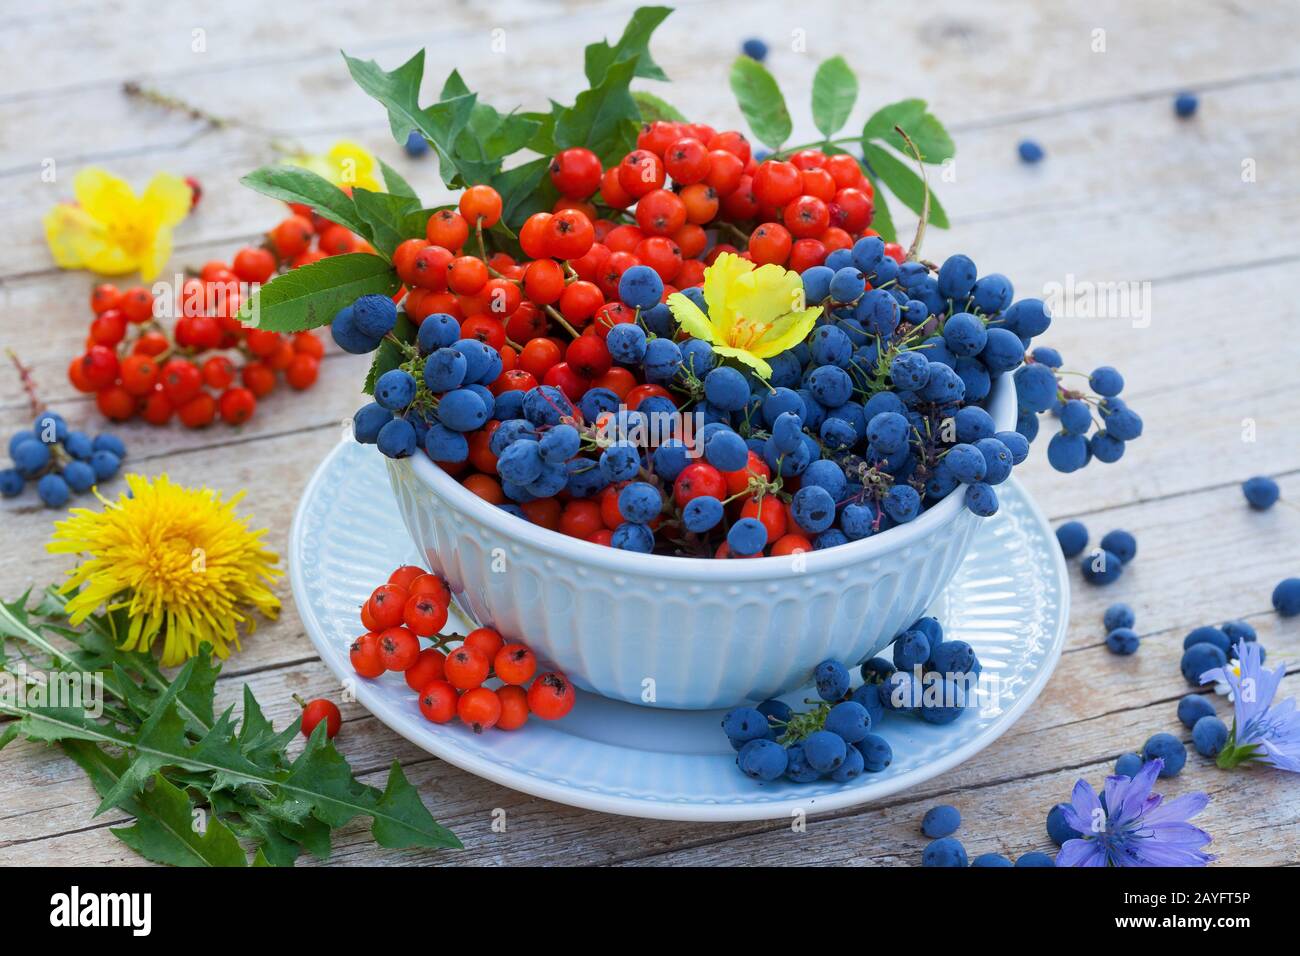 bowl with mountain grapes and rowan tree berries, decoratet with flowers of dandelion and blue sailors, Germany Stock Photo